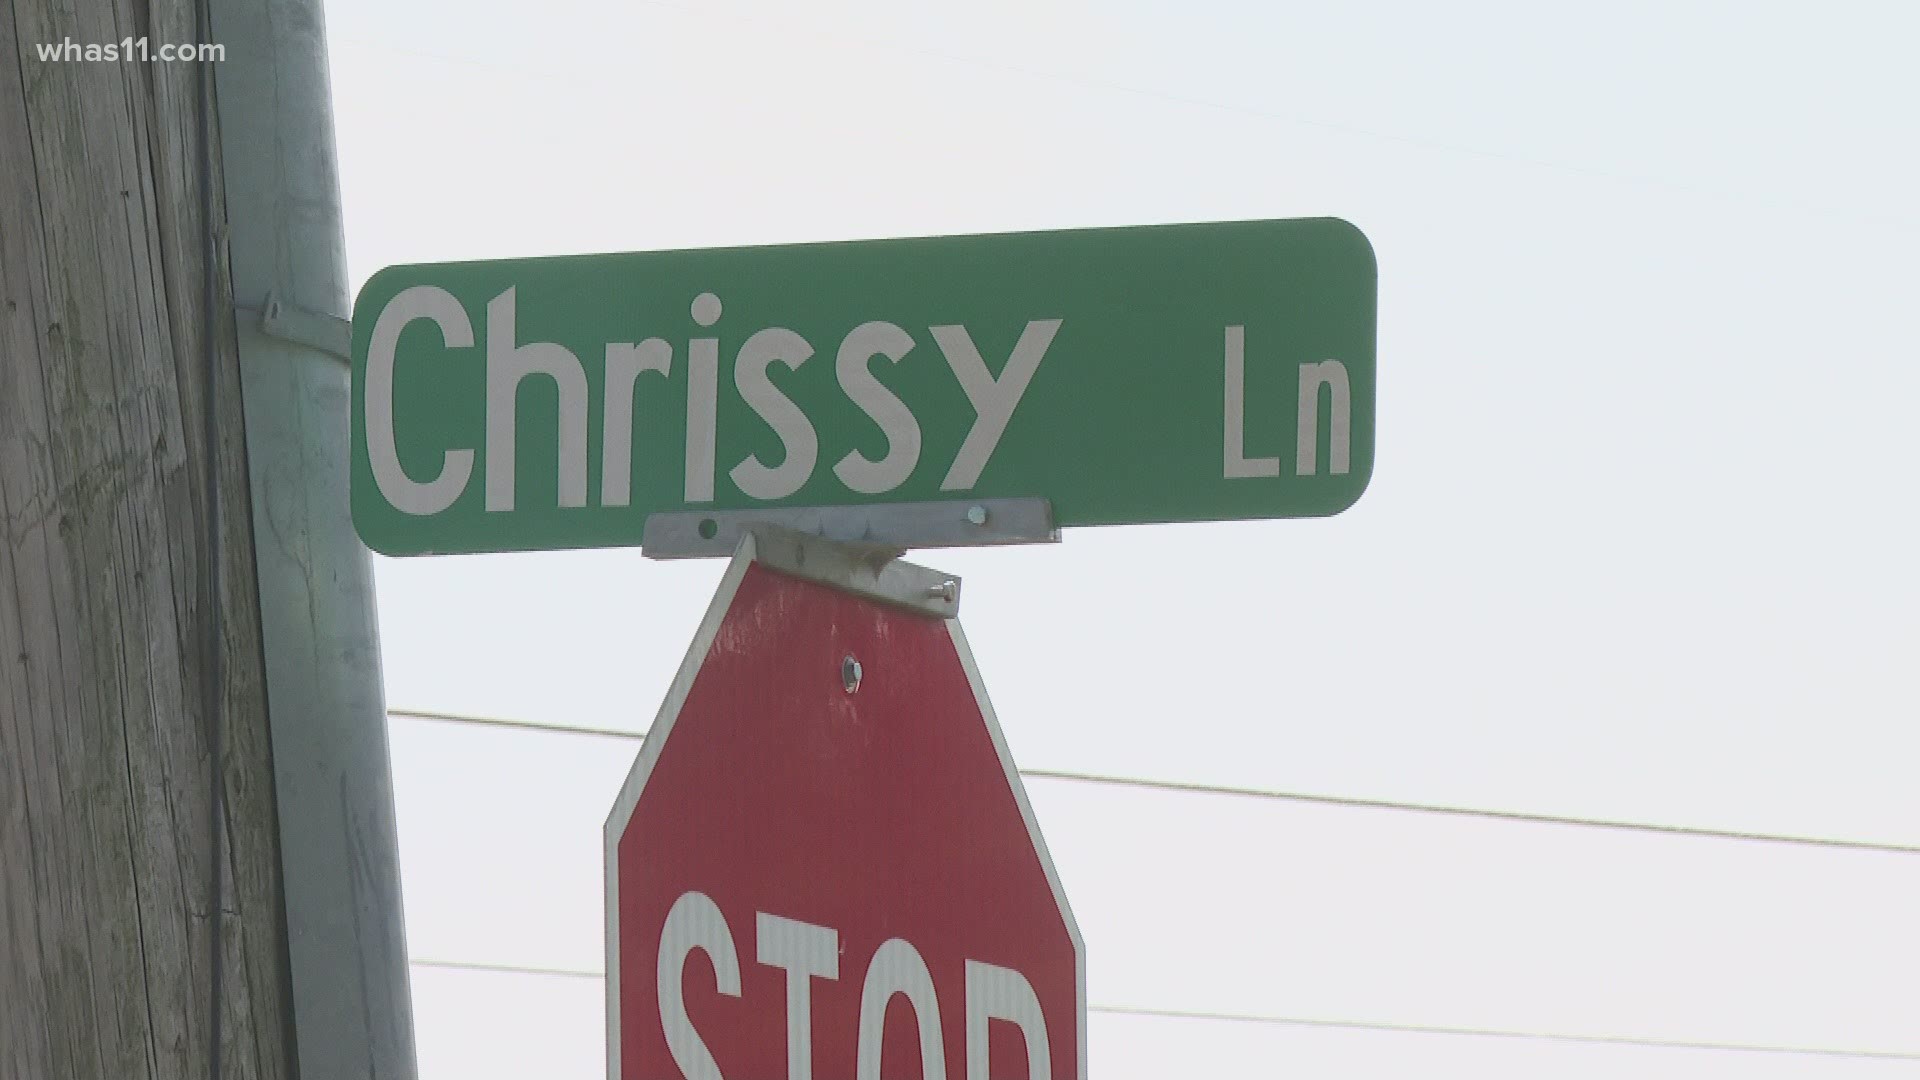 Chrissy Grimsley planned to meet up with three men to sell them marijuana in Harrison County.